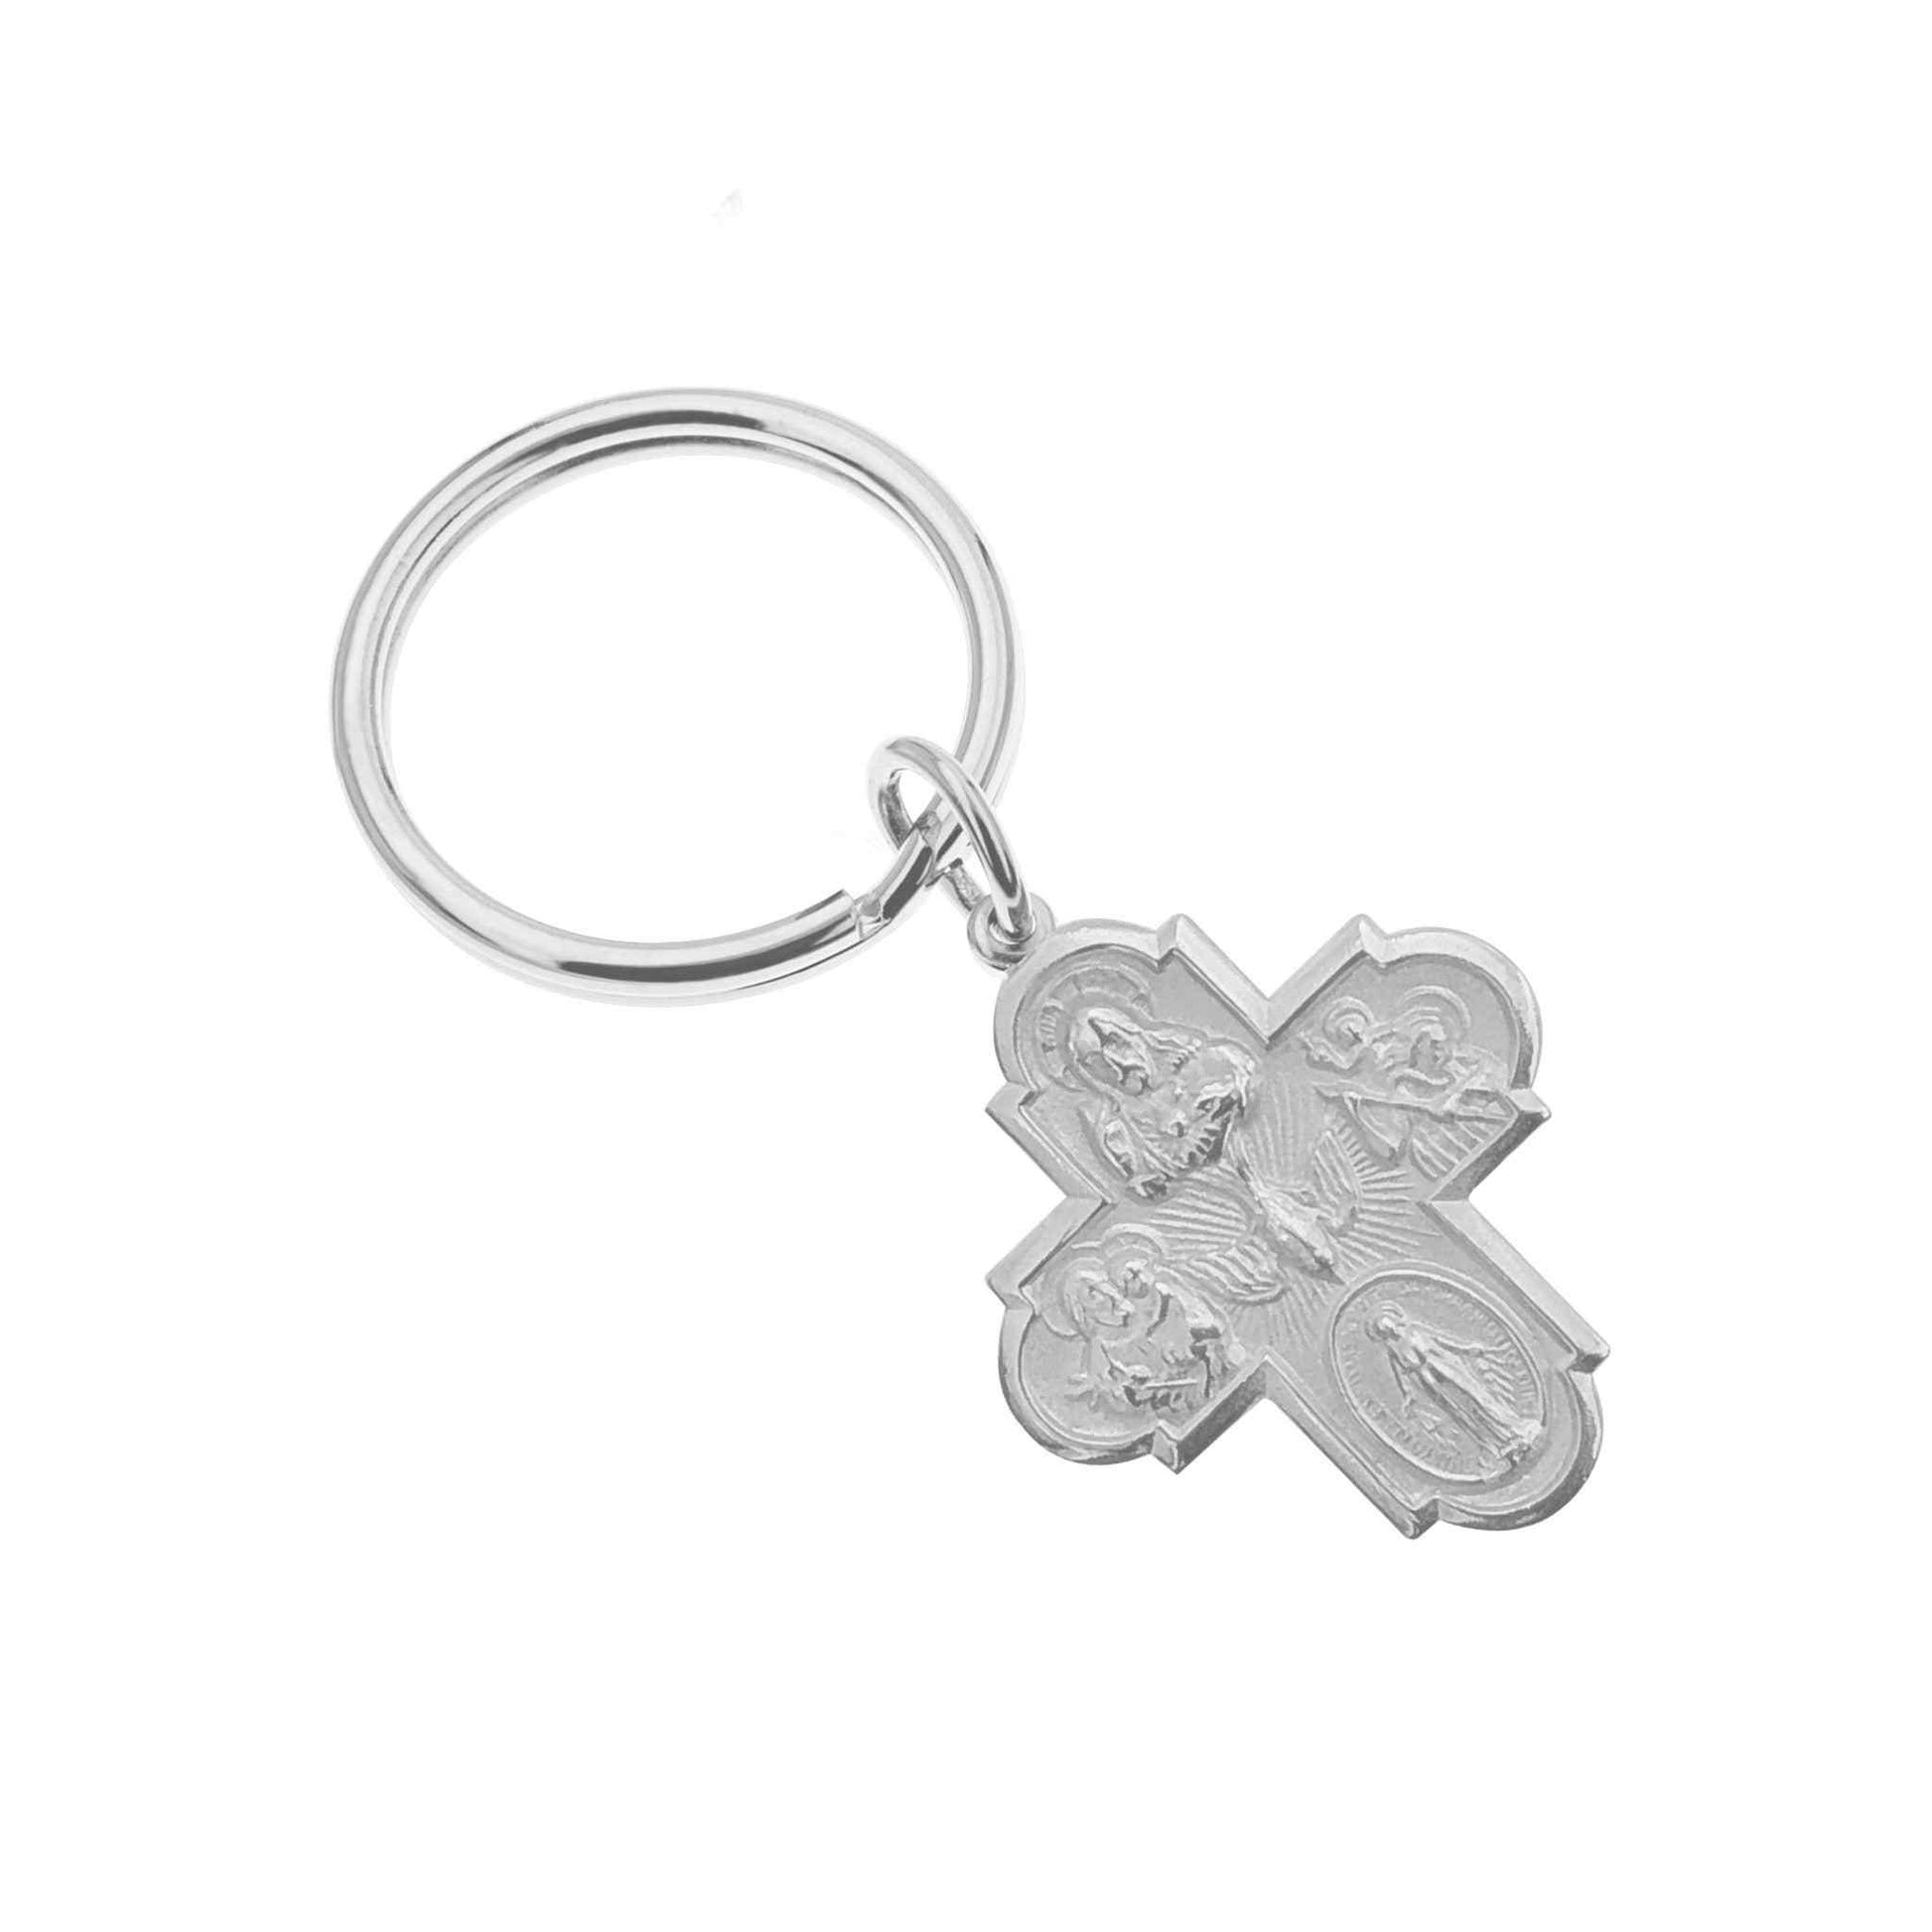 A five way cross key ring displayed on a neutral white background.